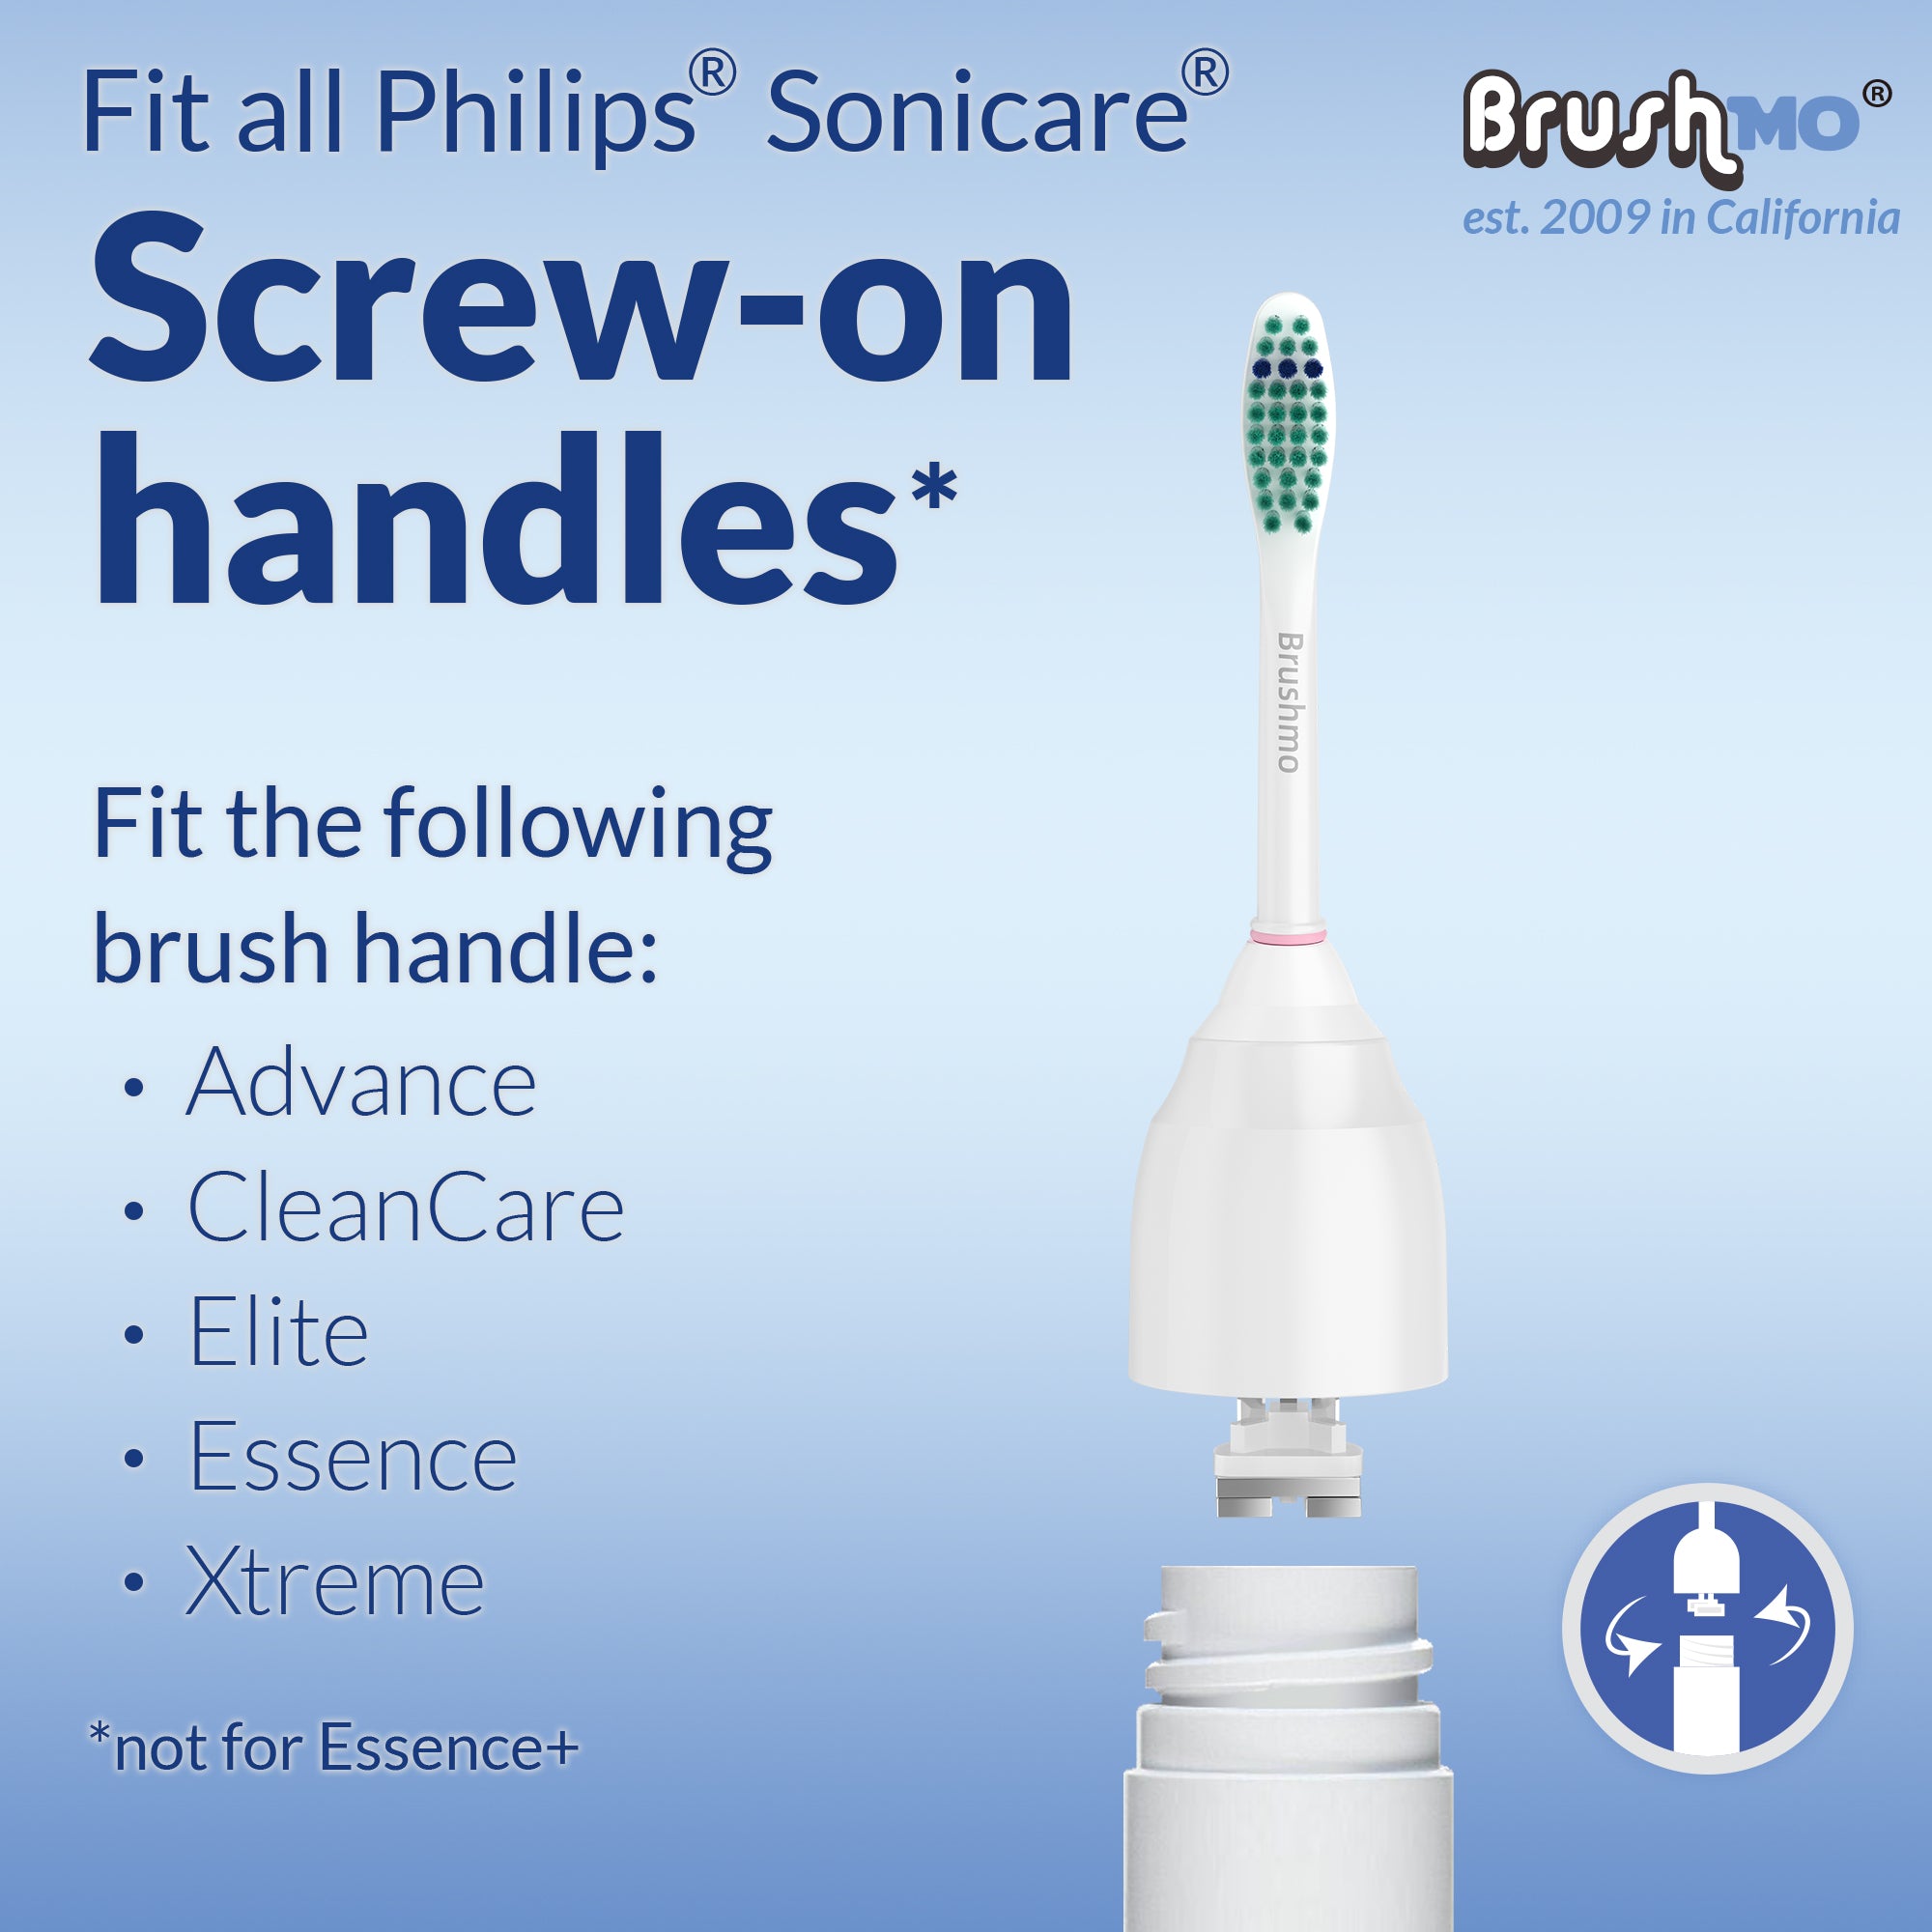 Brushmo Standard Size Replacement Toothbrush Heads Compatible with Philps Sonicare e-Series HX7022, 6pk